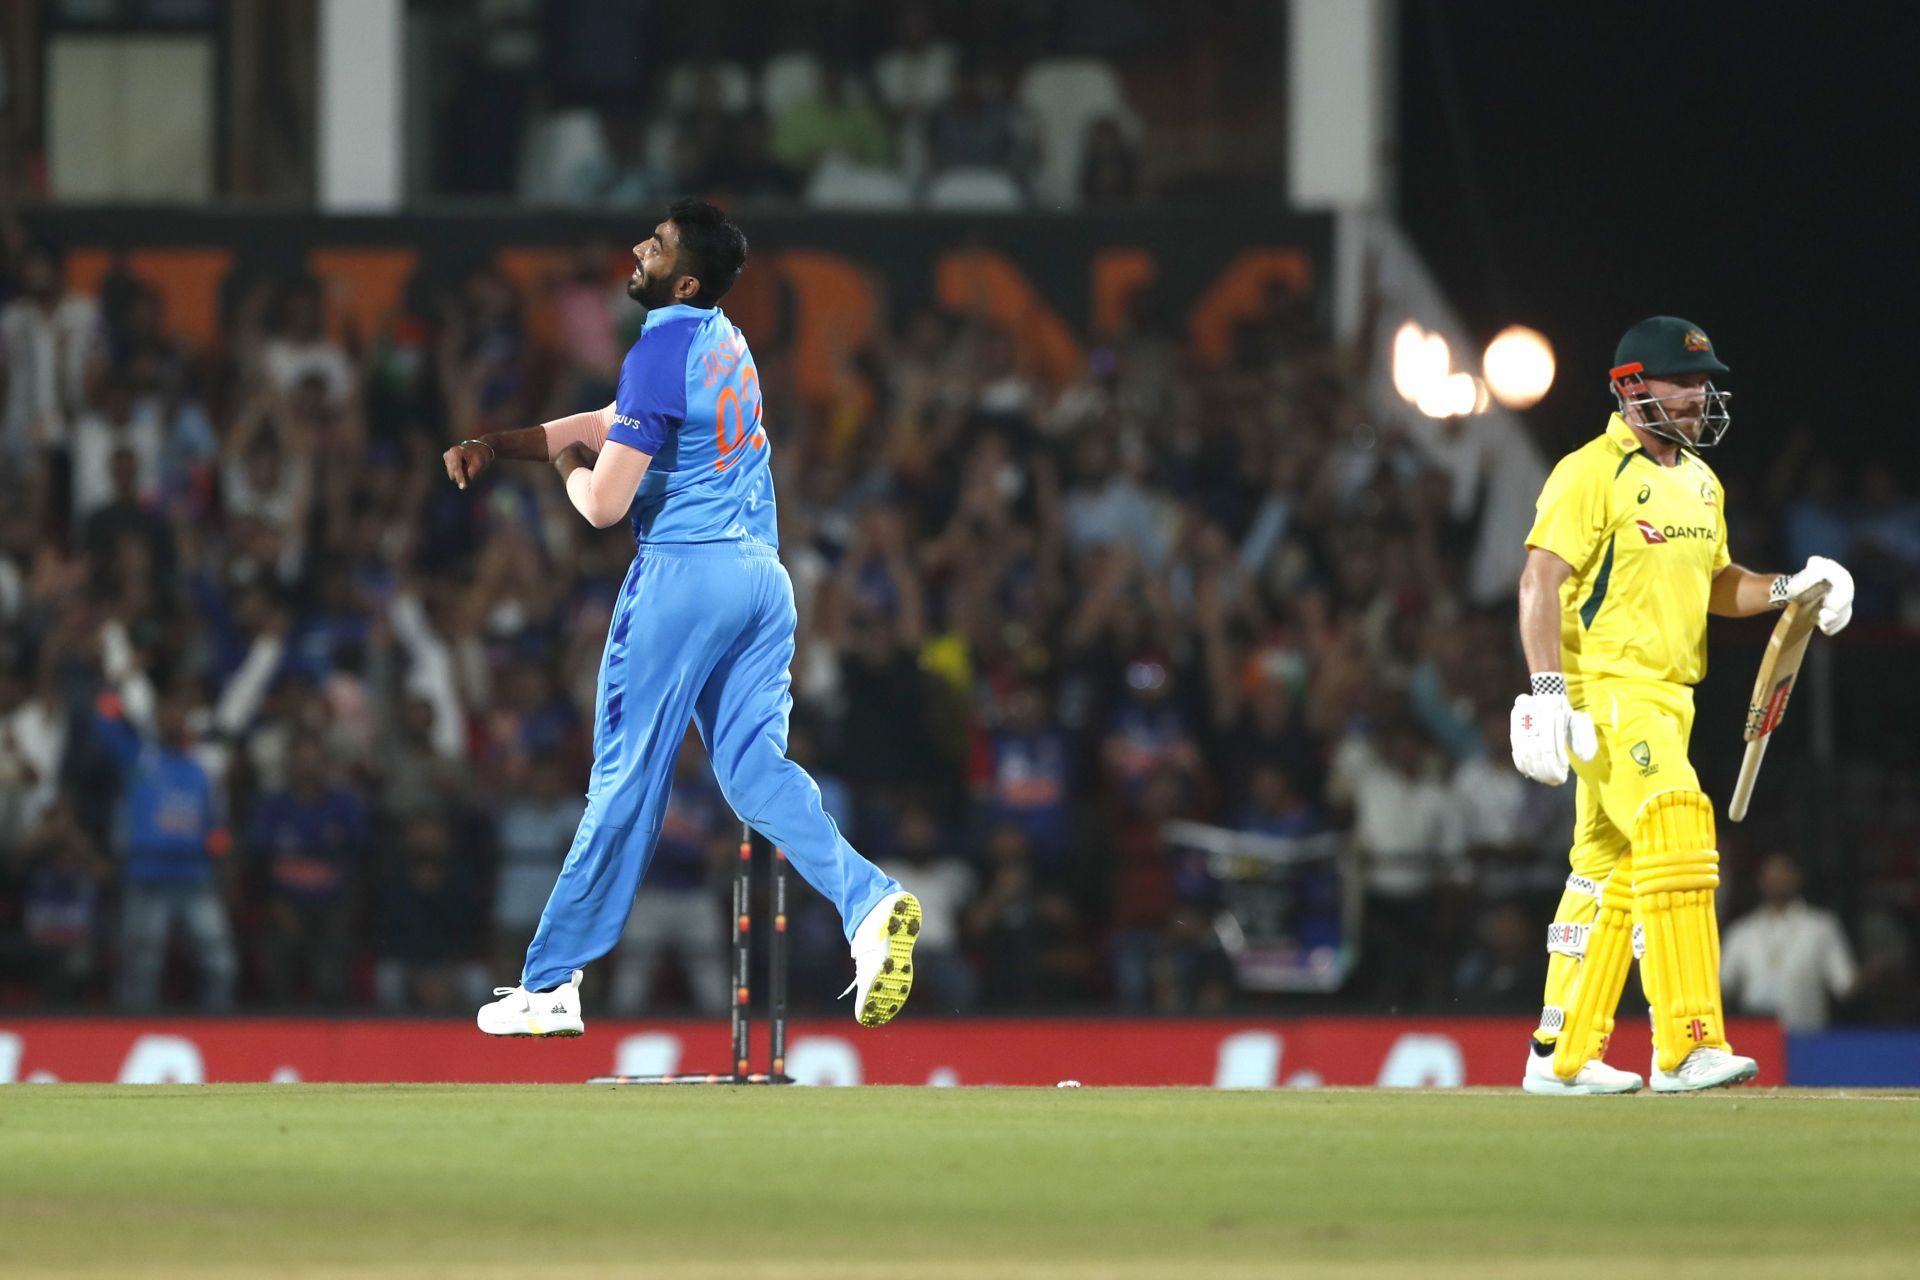 India have been missing Jasprit Bumrah, who is recuperating from a back injury. Pic: Getty Images